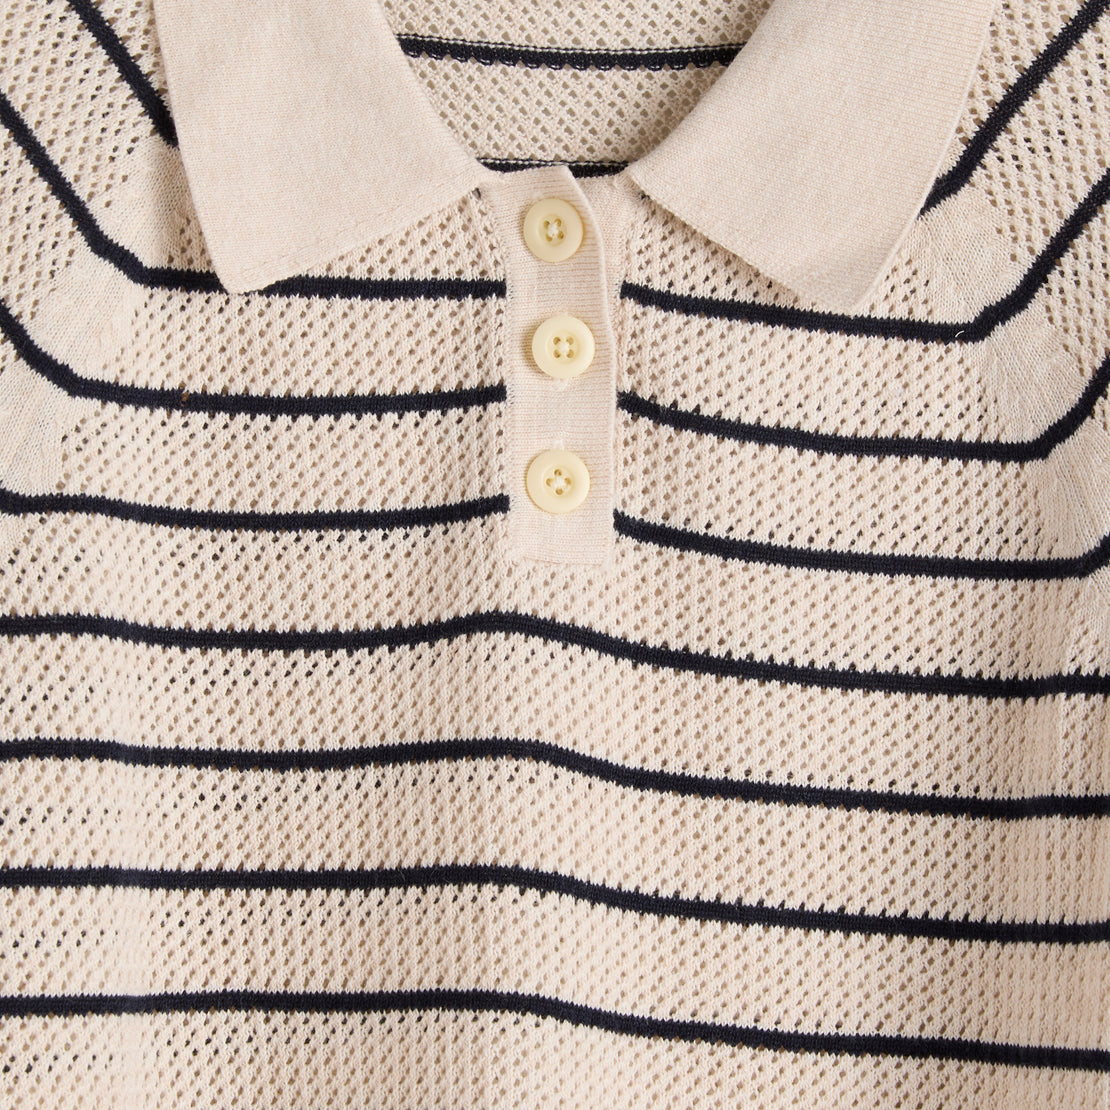 Polo Sweater in Stripe - Ivory/Navy - Alex Mill - STAG Provisions - W - Tops - S/S Knit